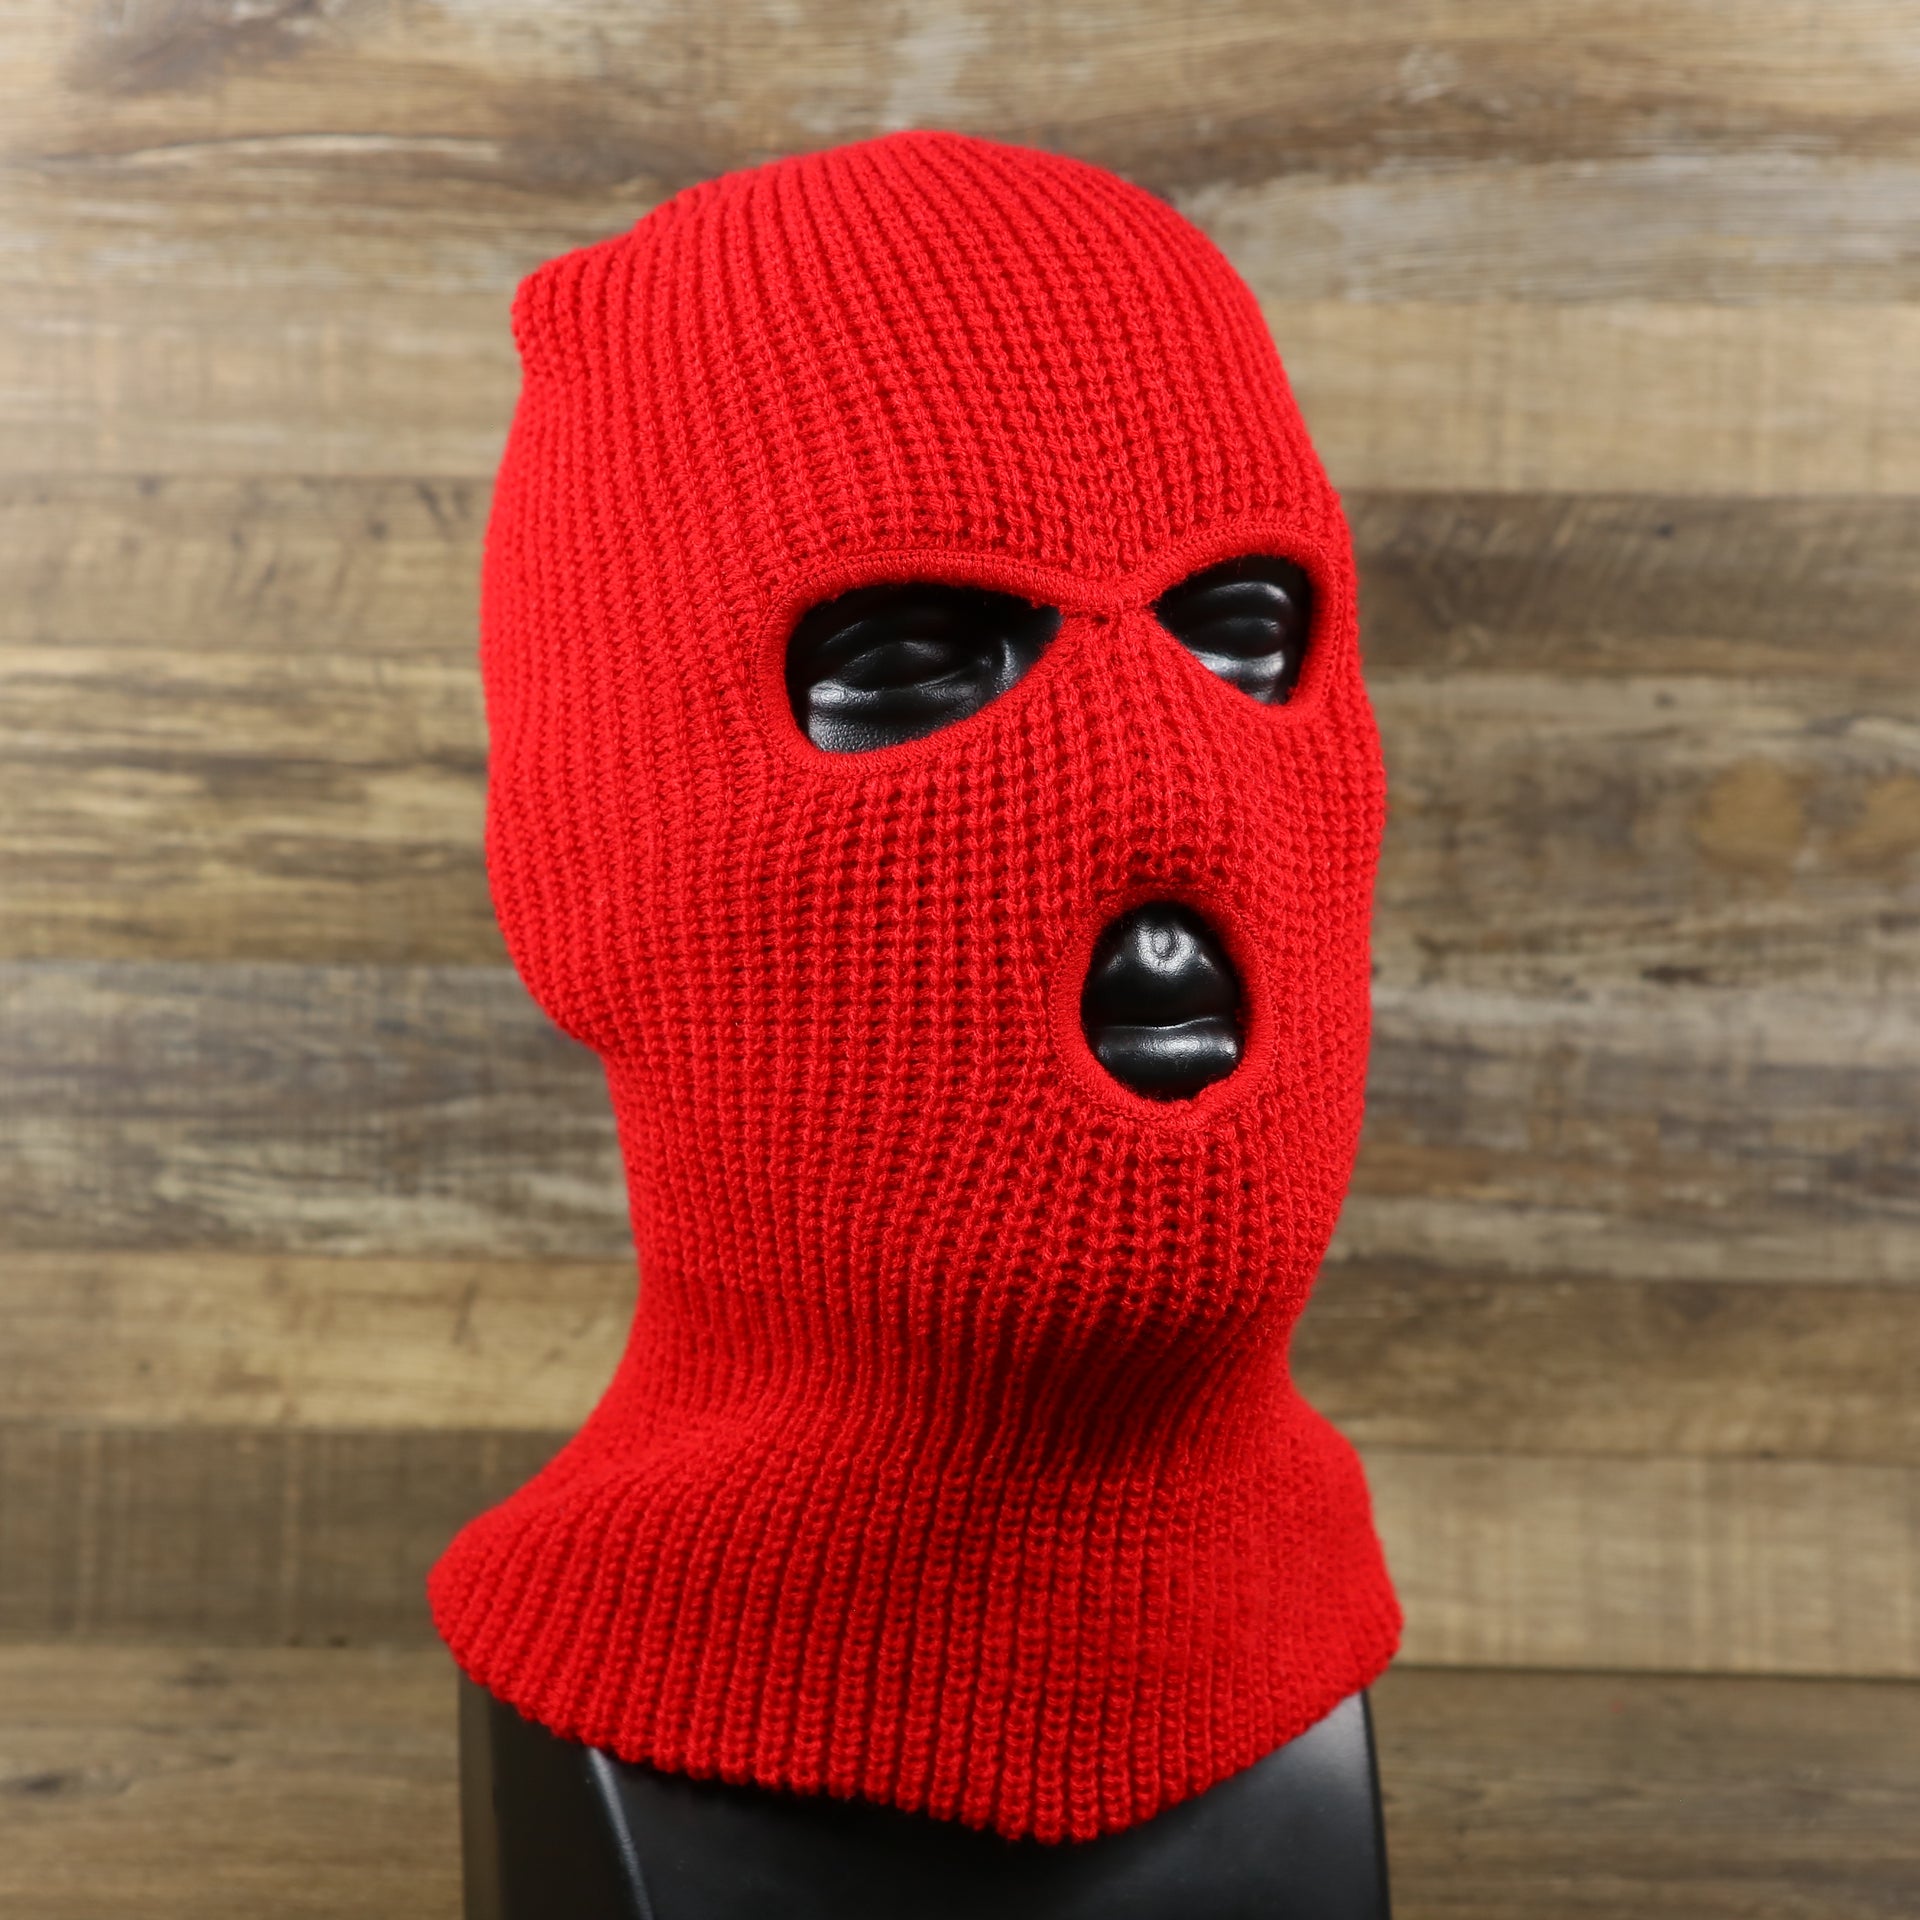 The Cardinal Red Blank Three Hole Winter Knit Ski Mask | Red Ski Mask on a mannequin